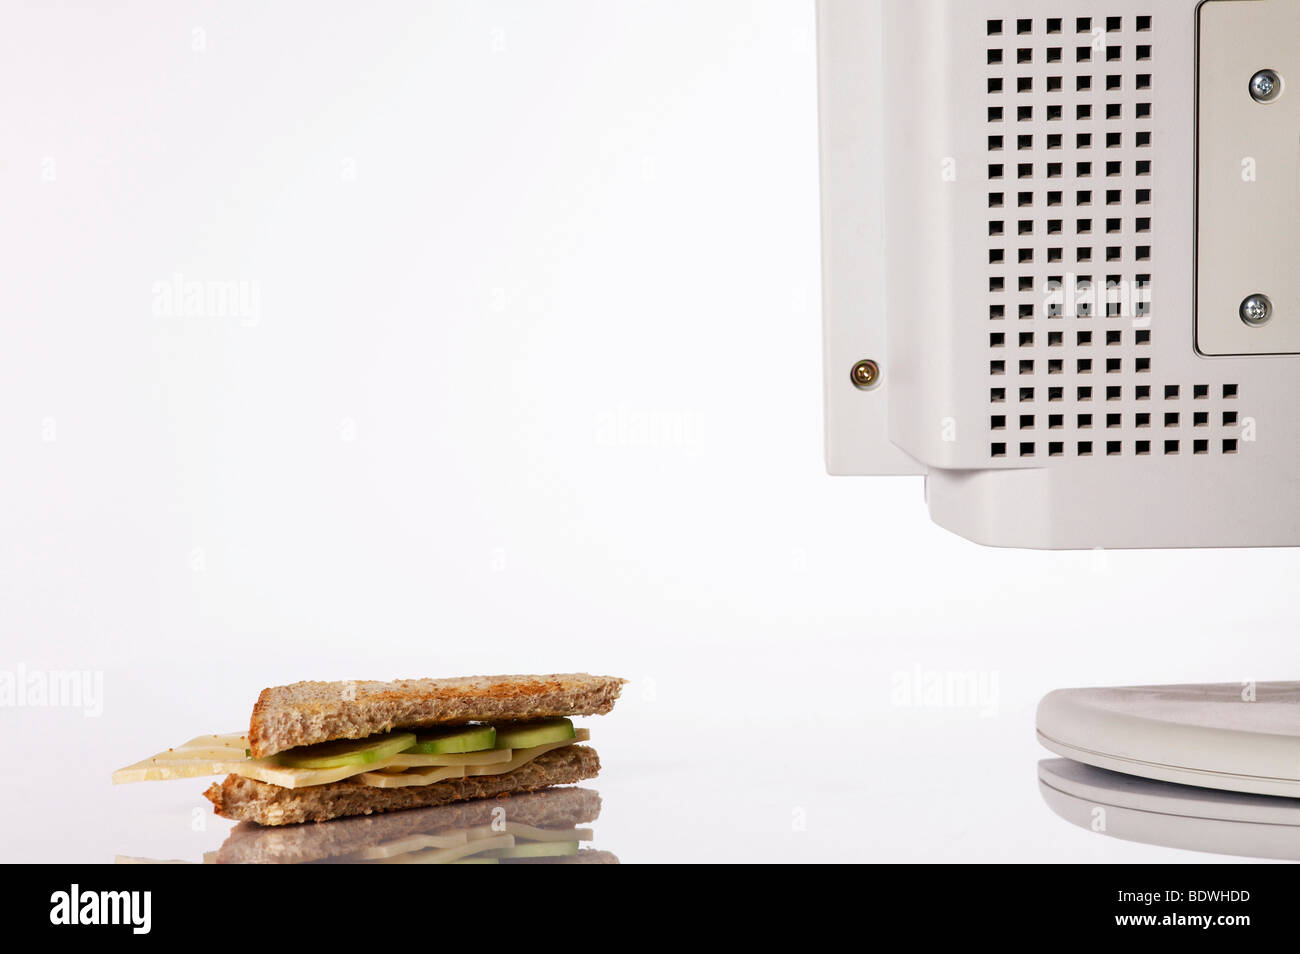 Sandwich at the computer of a working station Stock Photo